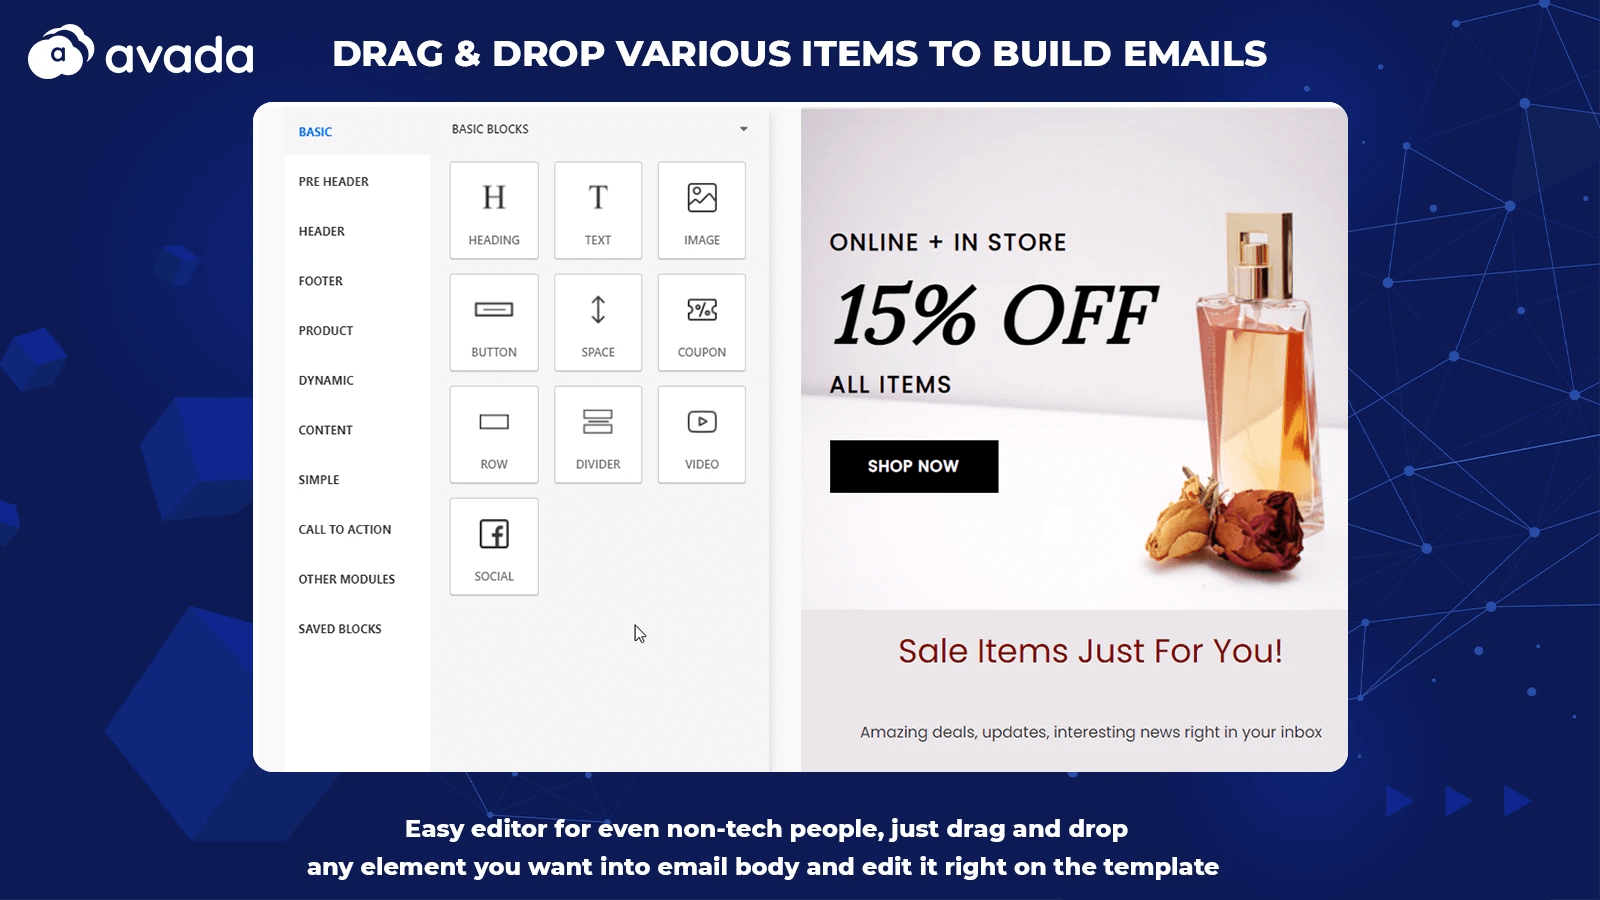 Avada Email Marketing, Automation, SMS, Pop-up